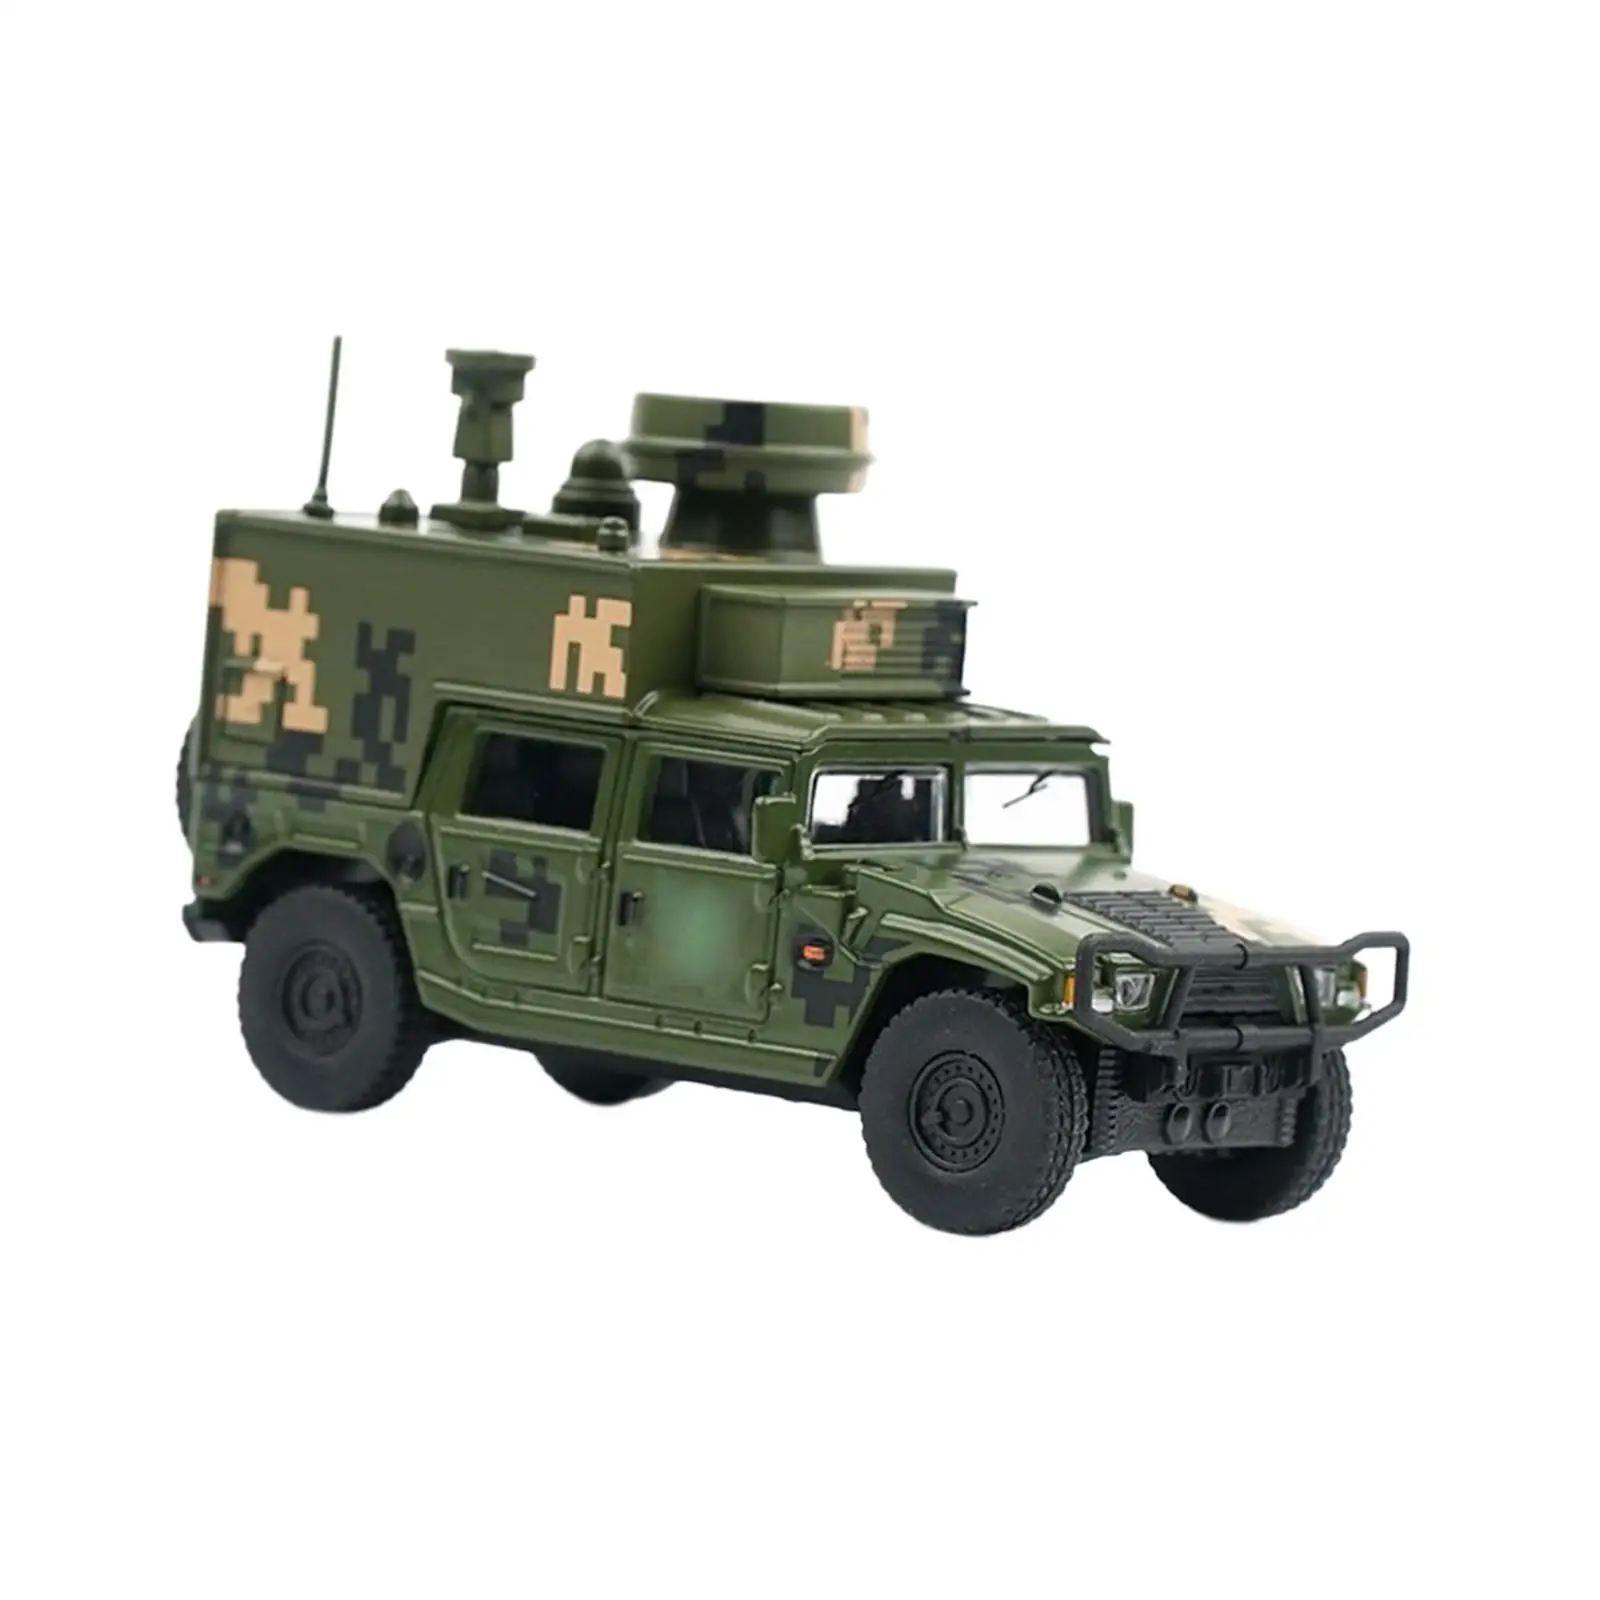 

Diecast Model Truck 1:64 Scale Model Car, Collectible Realistic Armored Toy Car Metal for Birthday Gift Kids Gifts Children